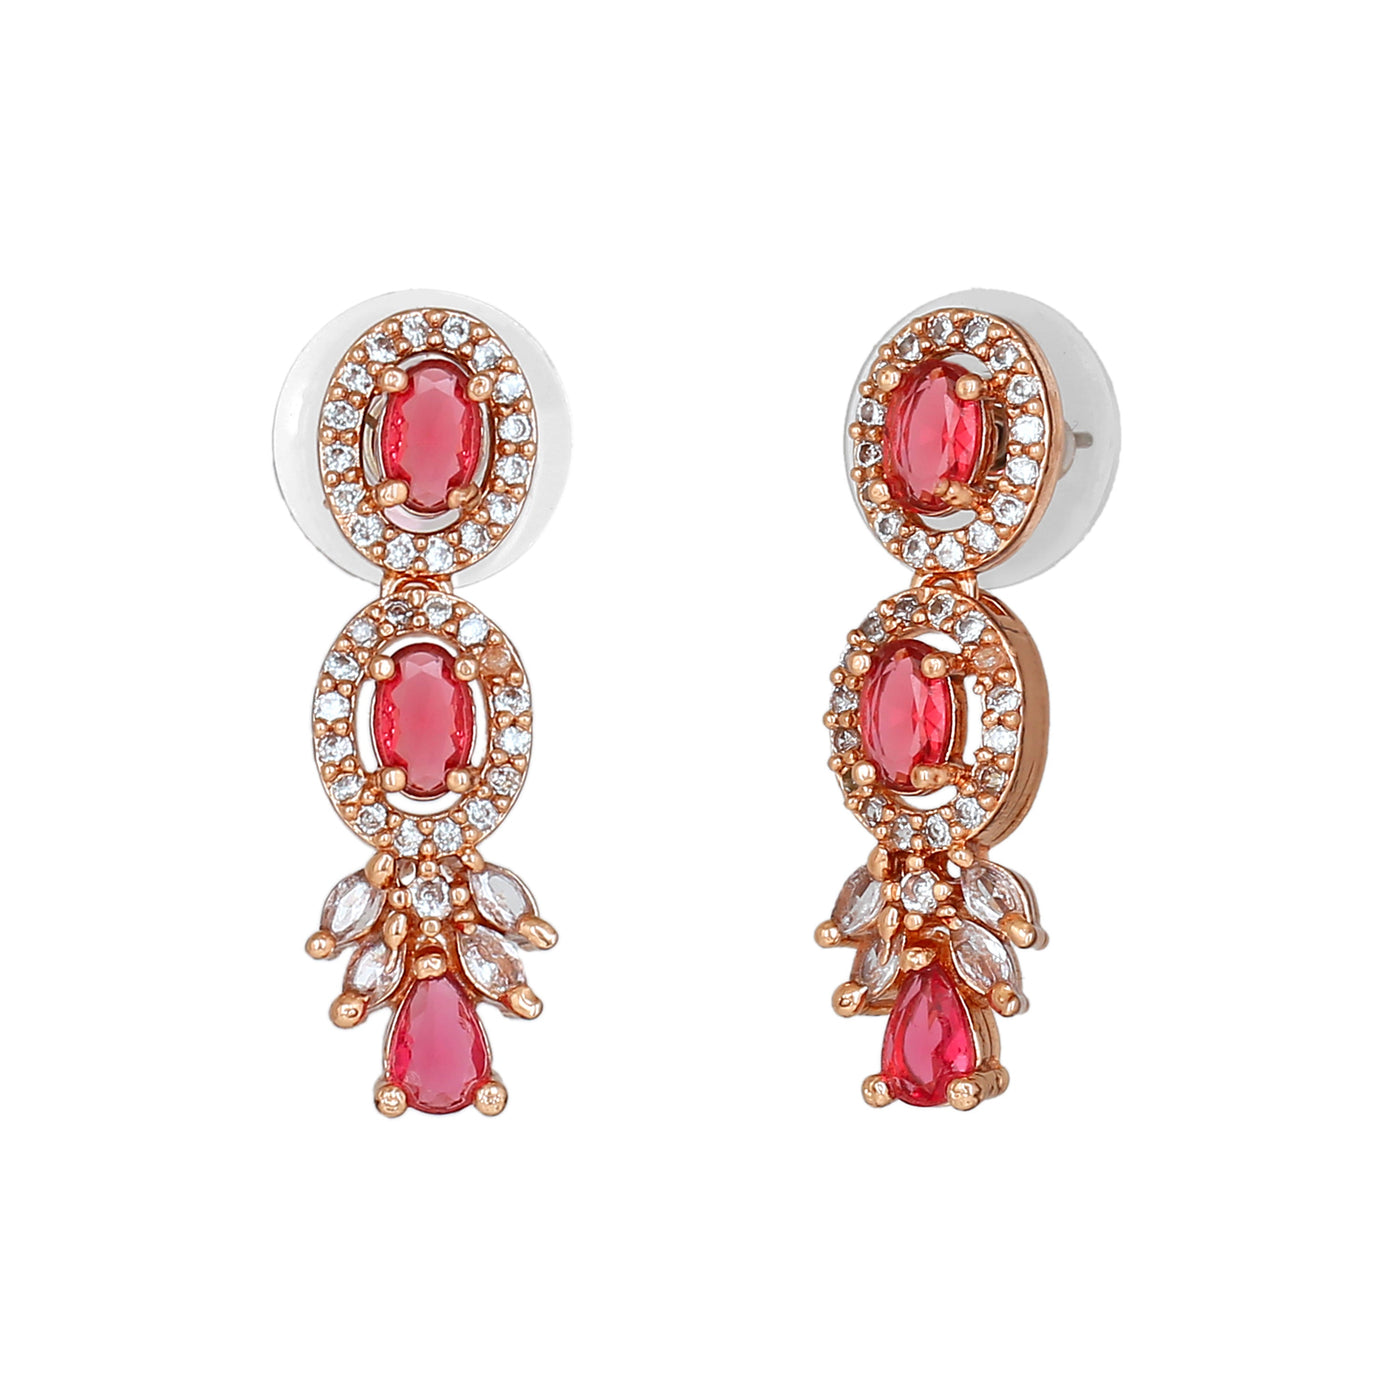 Estele Rose Gold Plated CZ Shimmering Drop Earrings with Tourmaline Pink Stones for Women